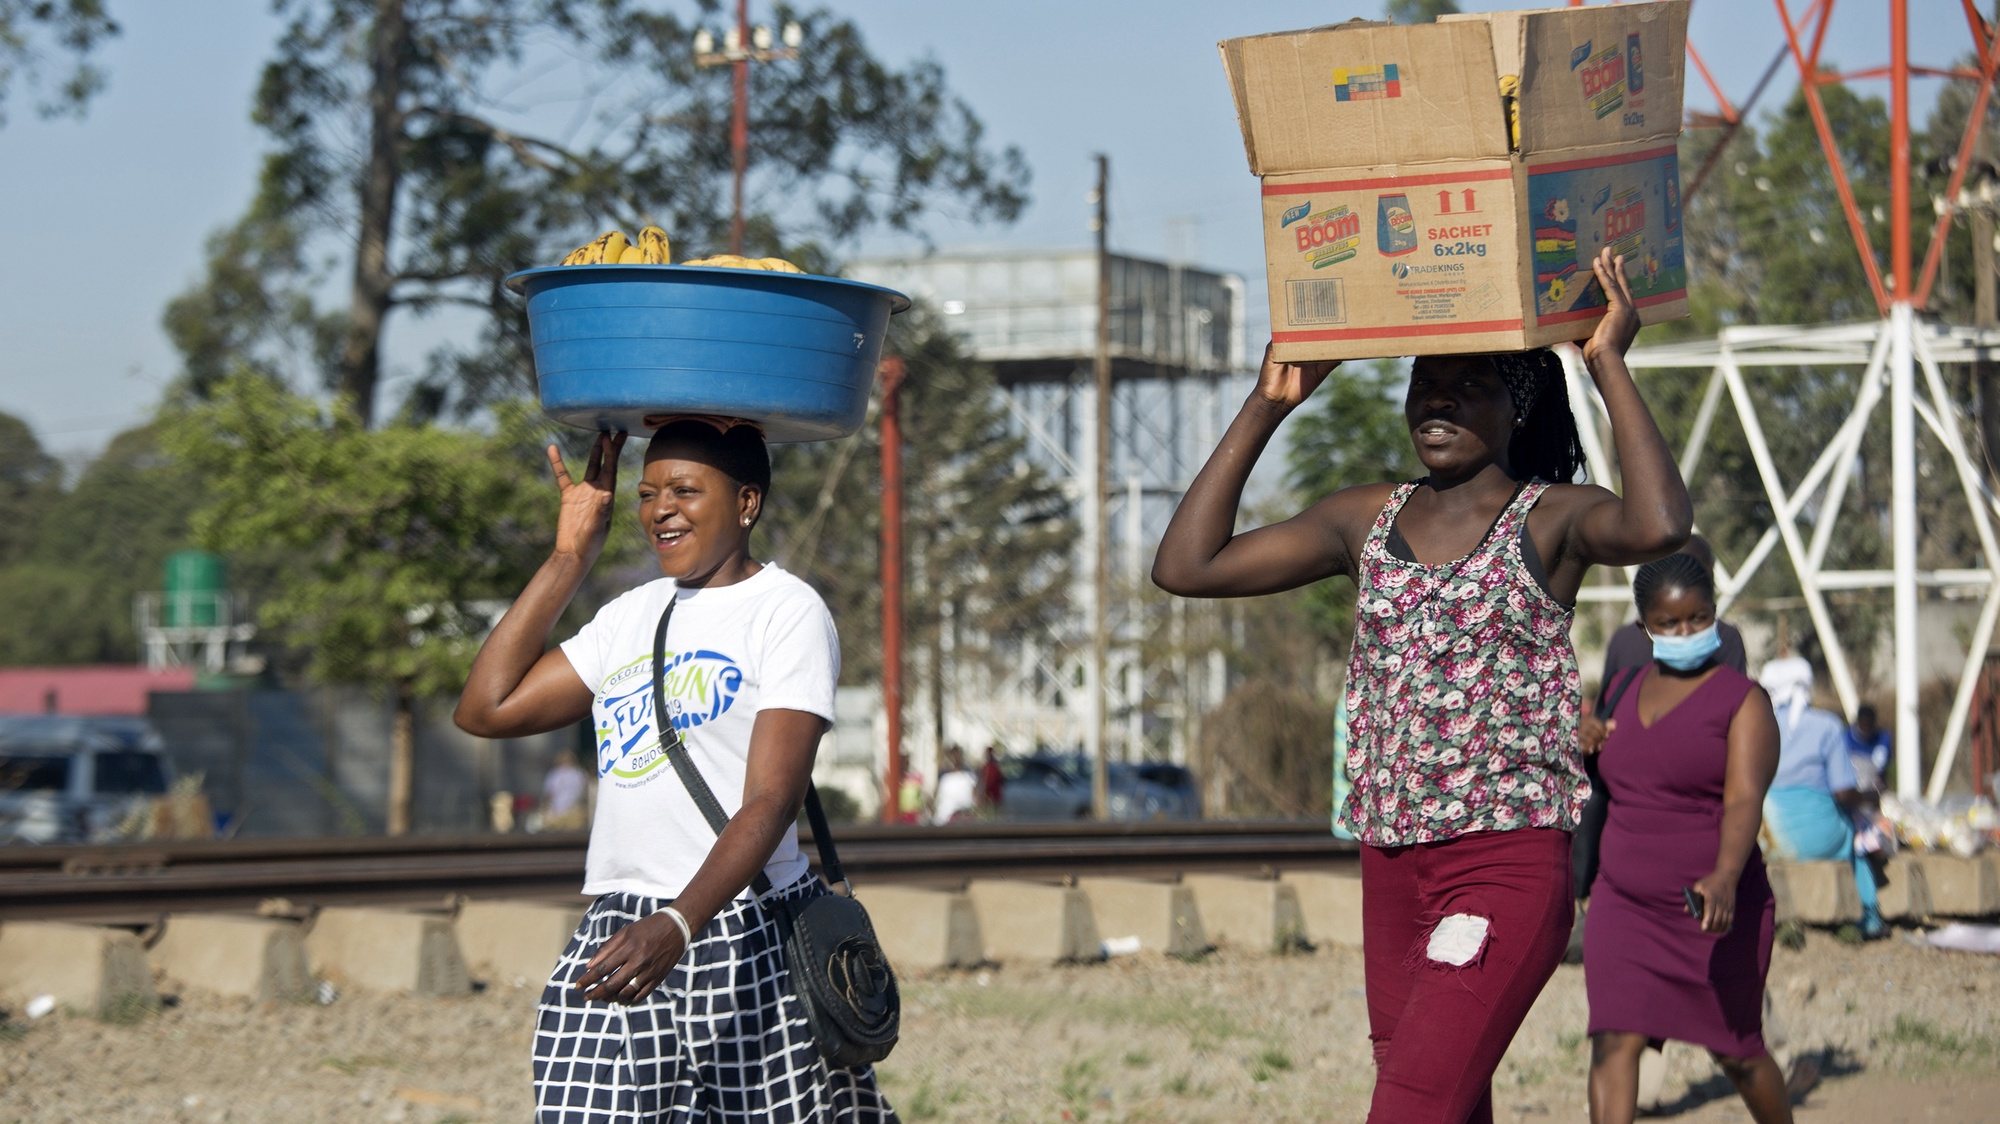 epa08757357 Women carrying goods on their heads walk in a street in Harare, Zimbabwe, 19 October 2020. According to the World Health Organisation (WHO), Africa faces a reality check in its fight against the coronavirus pandemic as cases and deaths rise after easing lockdowns and travel restrictions. The continent has seen an increase in weekly Covid-19 cases.  EPA/AARON UFUMELI